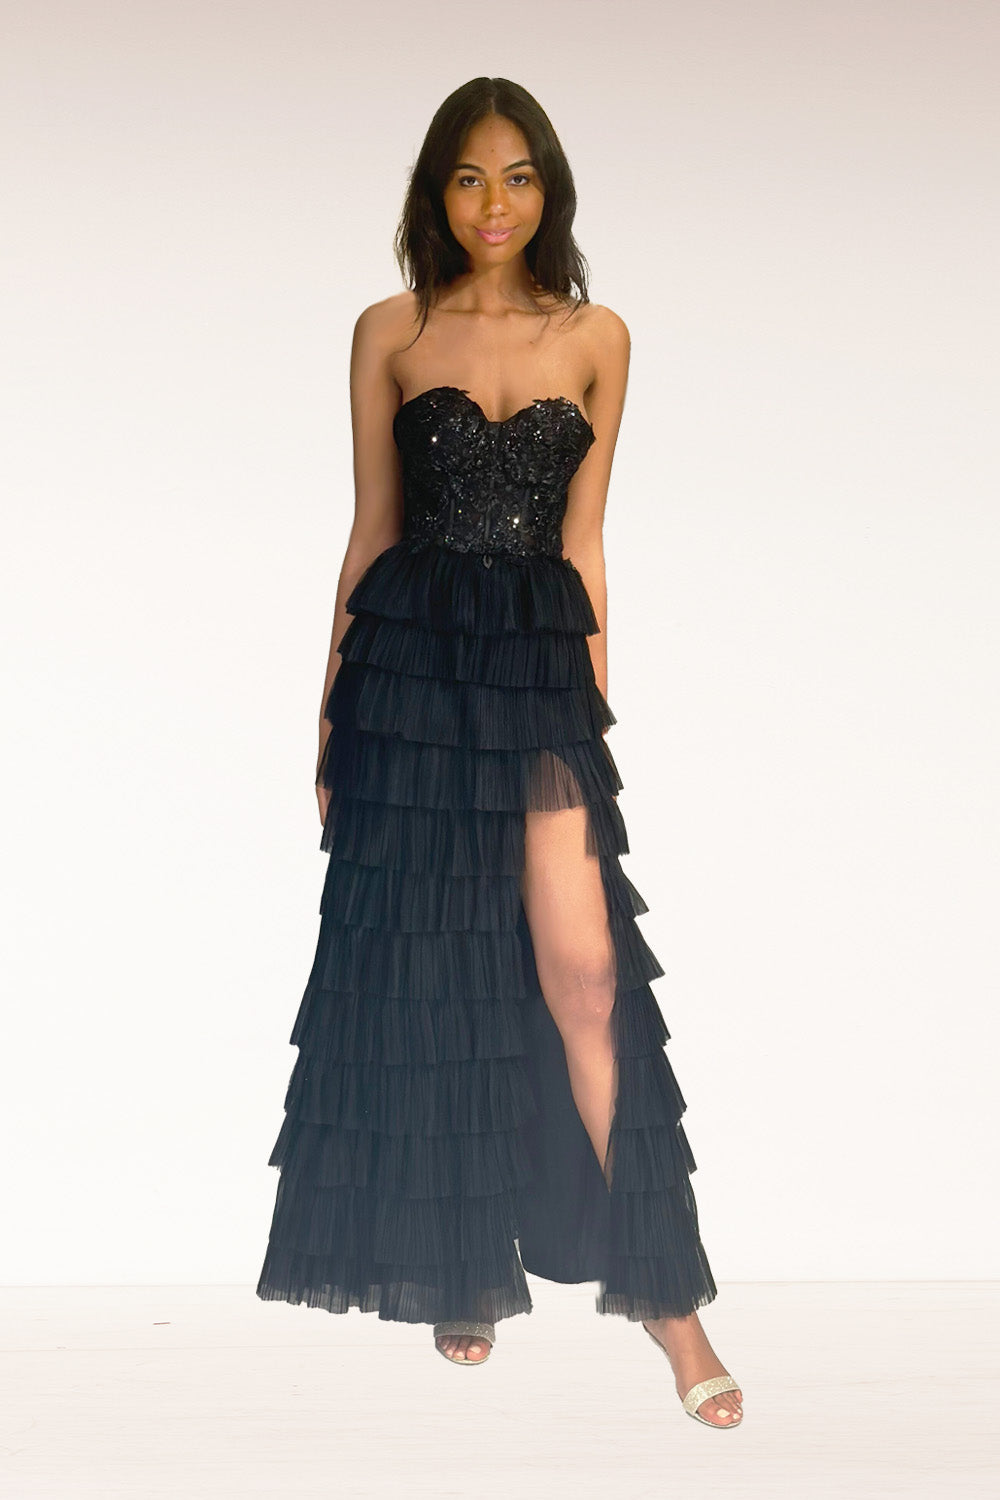 Lucci-Lu-1344-Sweetheart-Neckline-Open-Back-High-Slit-Lace-Tulle-A-Line-Black-Evening-Dress-B-Chic-Fashions-Prom-Dress